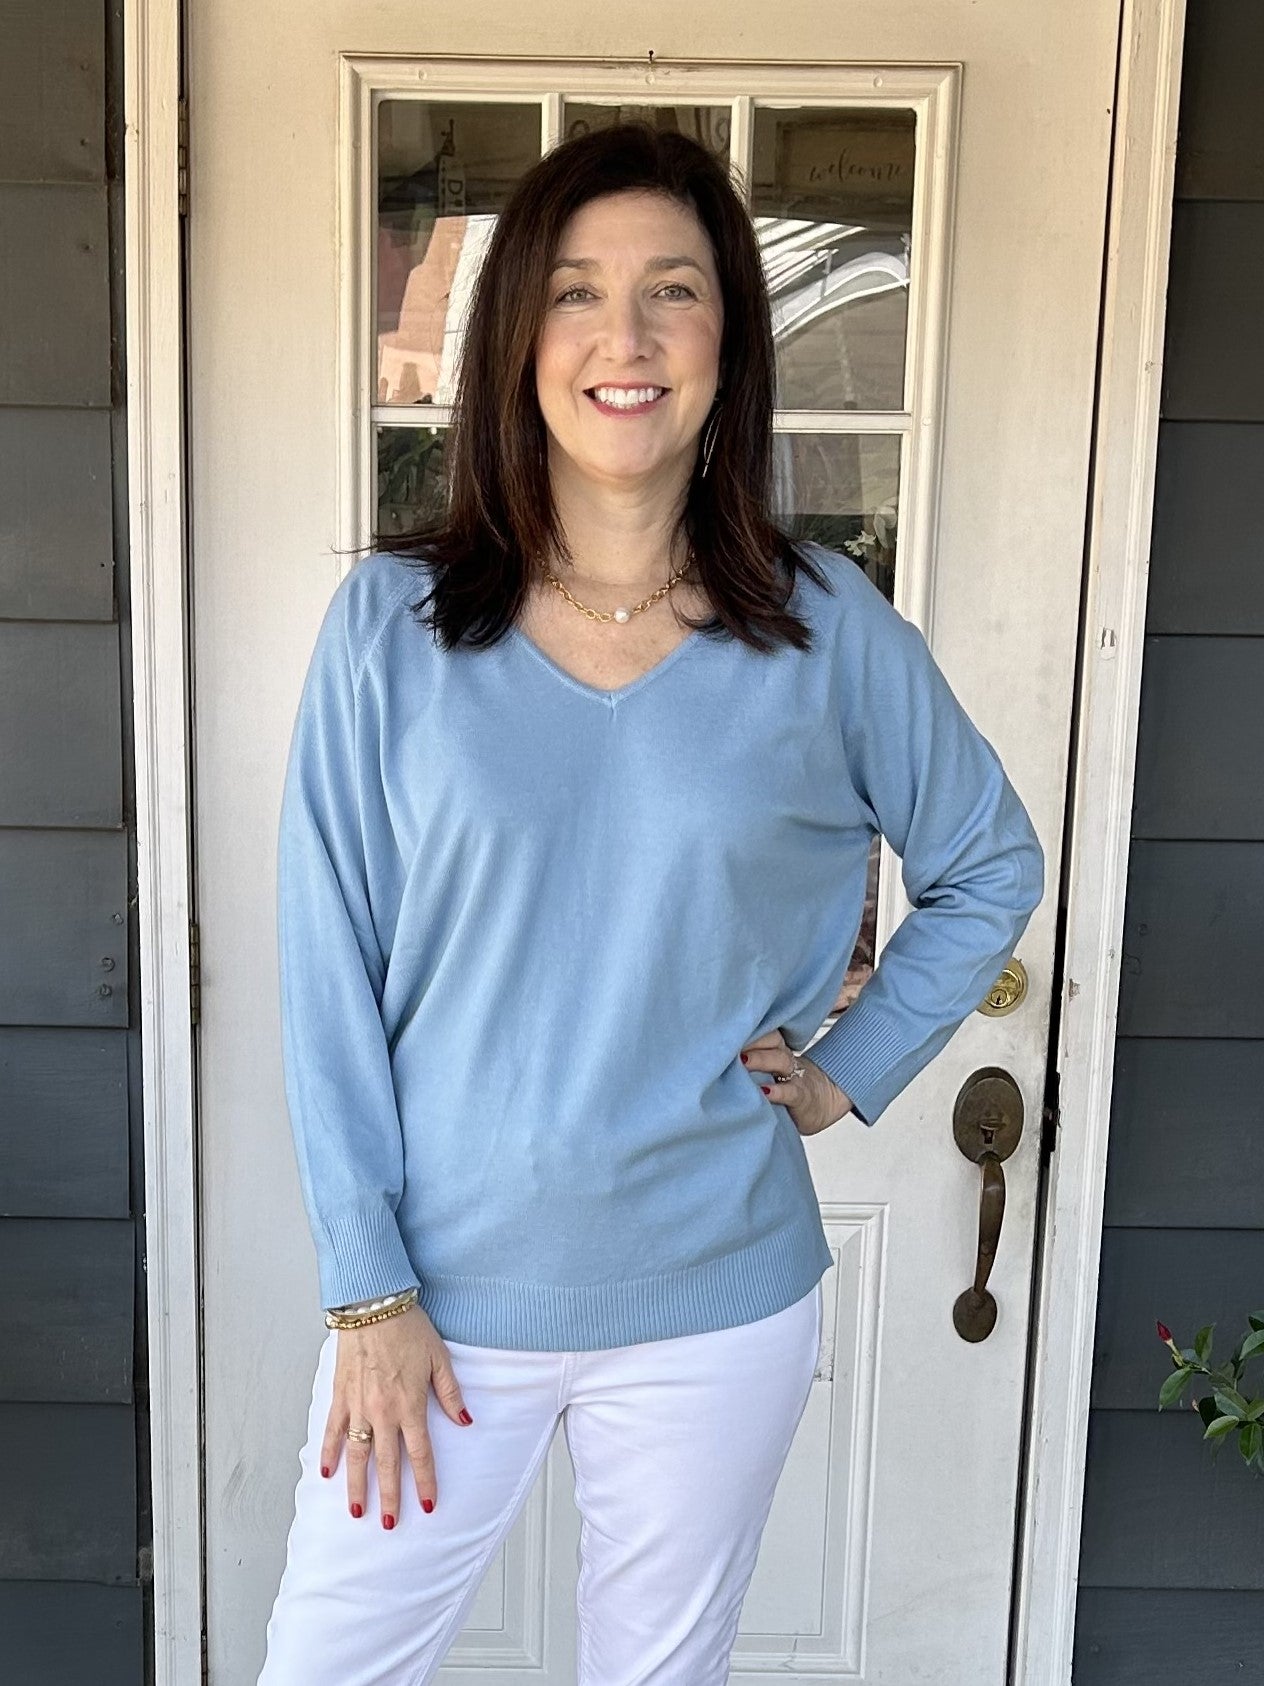 Transition effortlessly between seasons with our Camelia V-Neck Sweater! The lightweight design and stunning sky blue color make it perfect for spring, summer, and fall. Plus, the V-neck and banded cuffs and waist add a stylish touch to the classic raglan sleeve.&nbsp;  One size fits most.  Material: 52% Viscose / 24% Polyamide / 20% Polyester / 4% Elastan